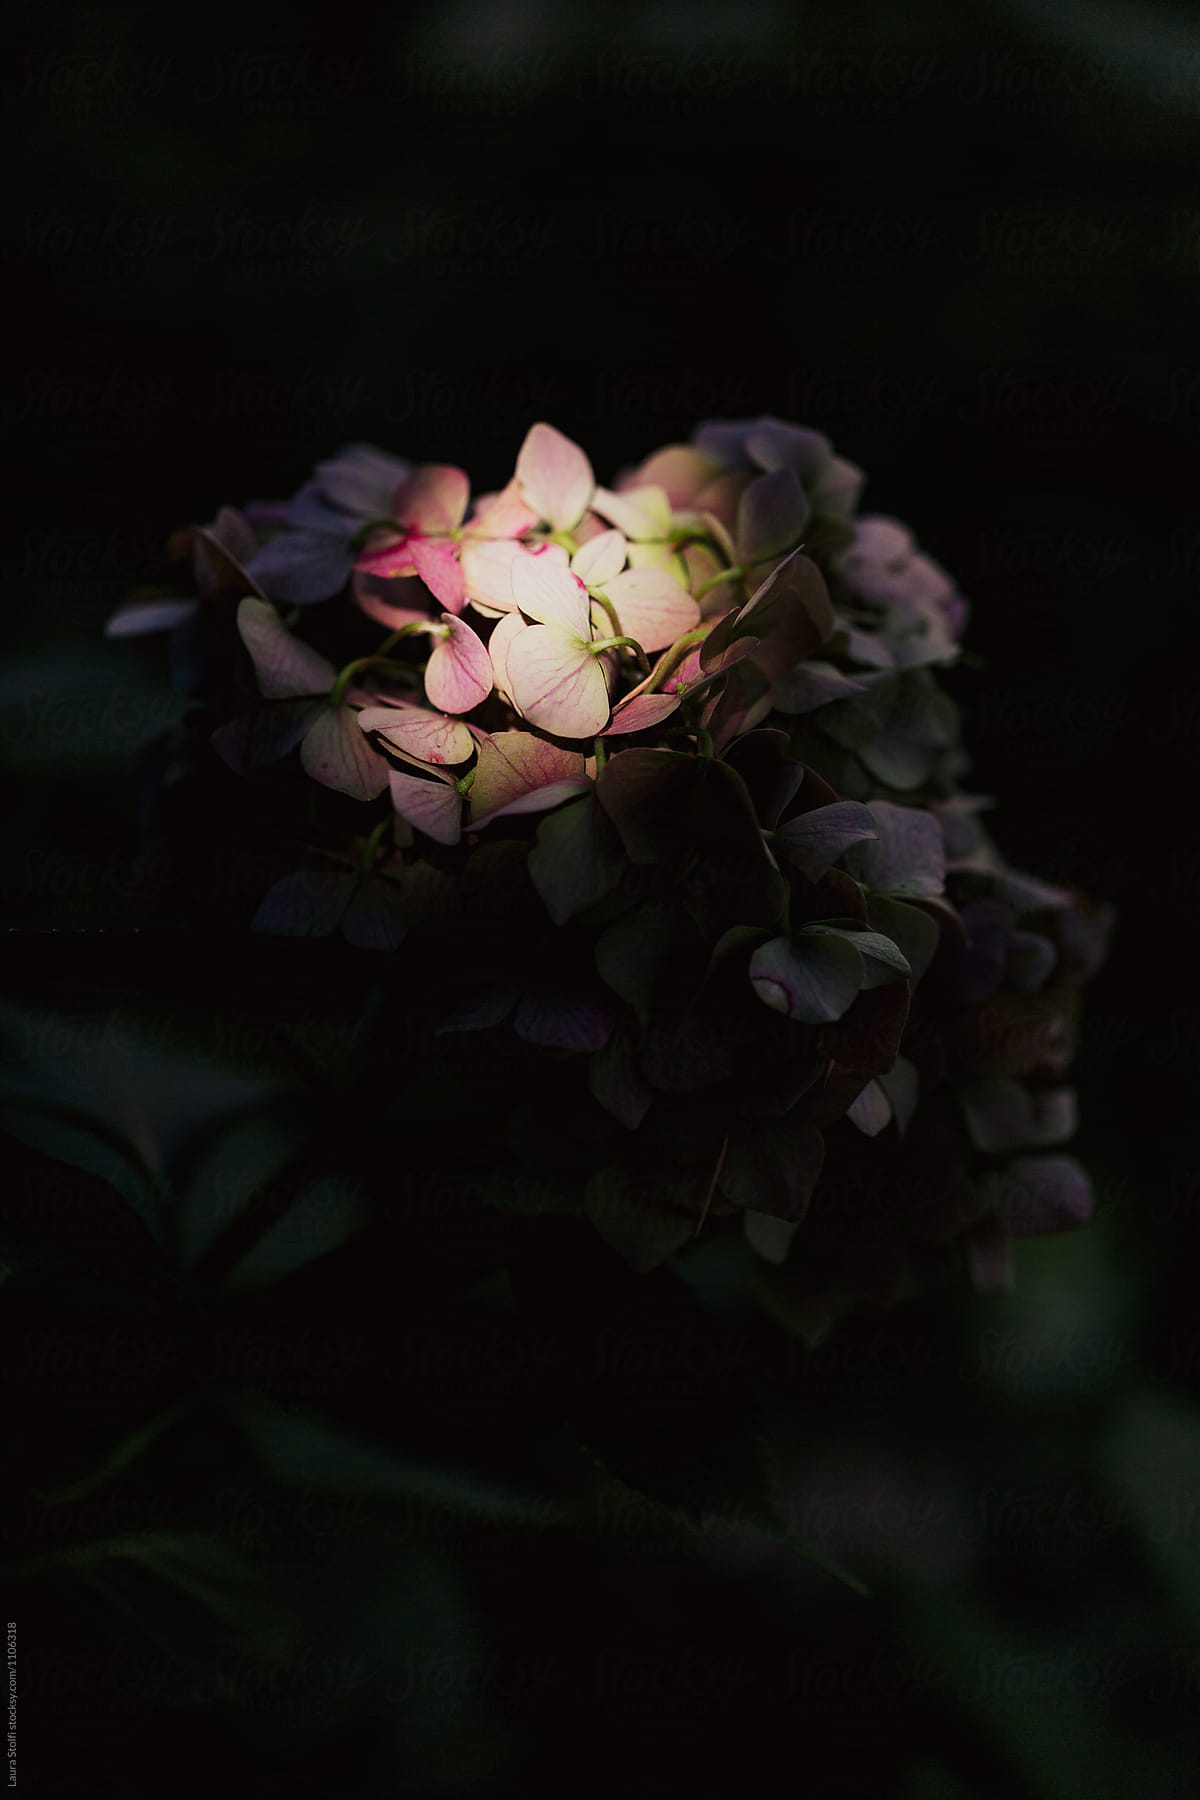 Close up of hydrangea flower in dark shadow with some petals illuminated by sunlight